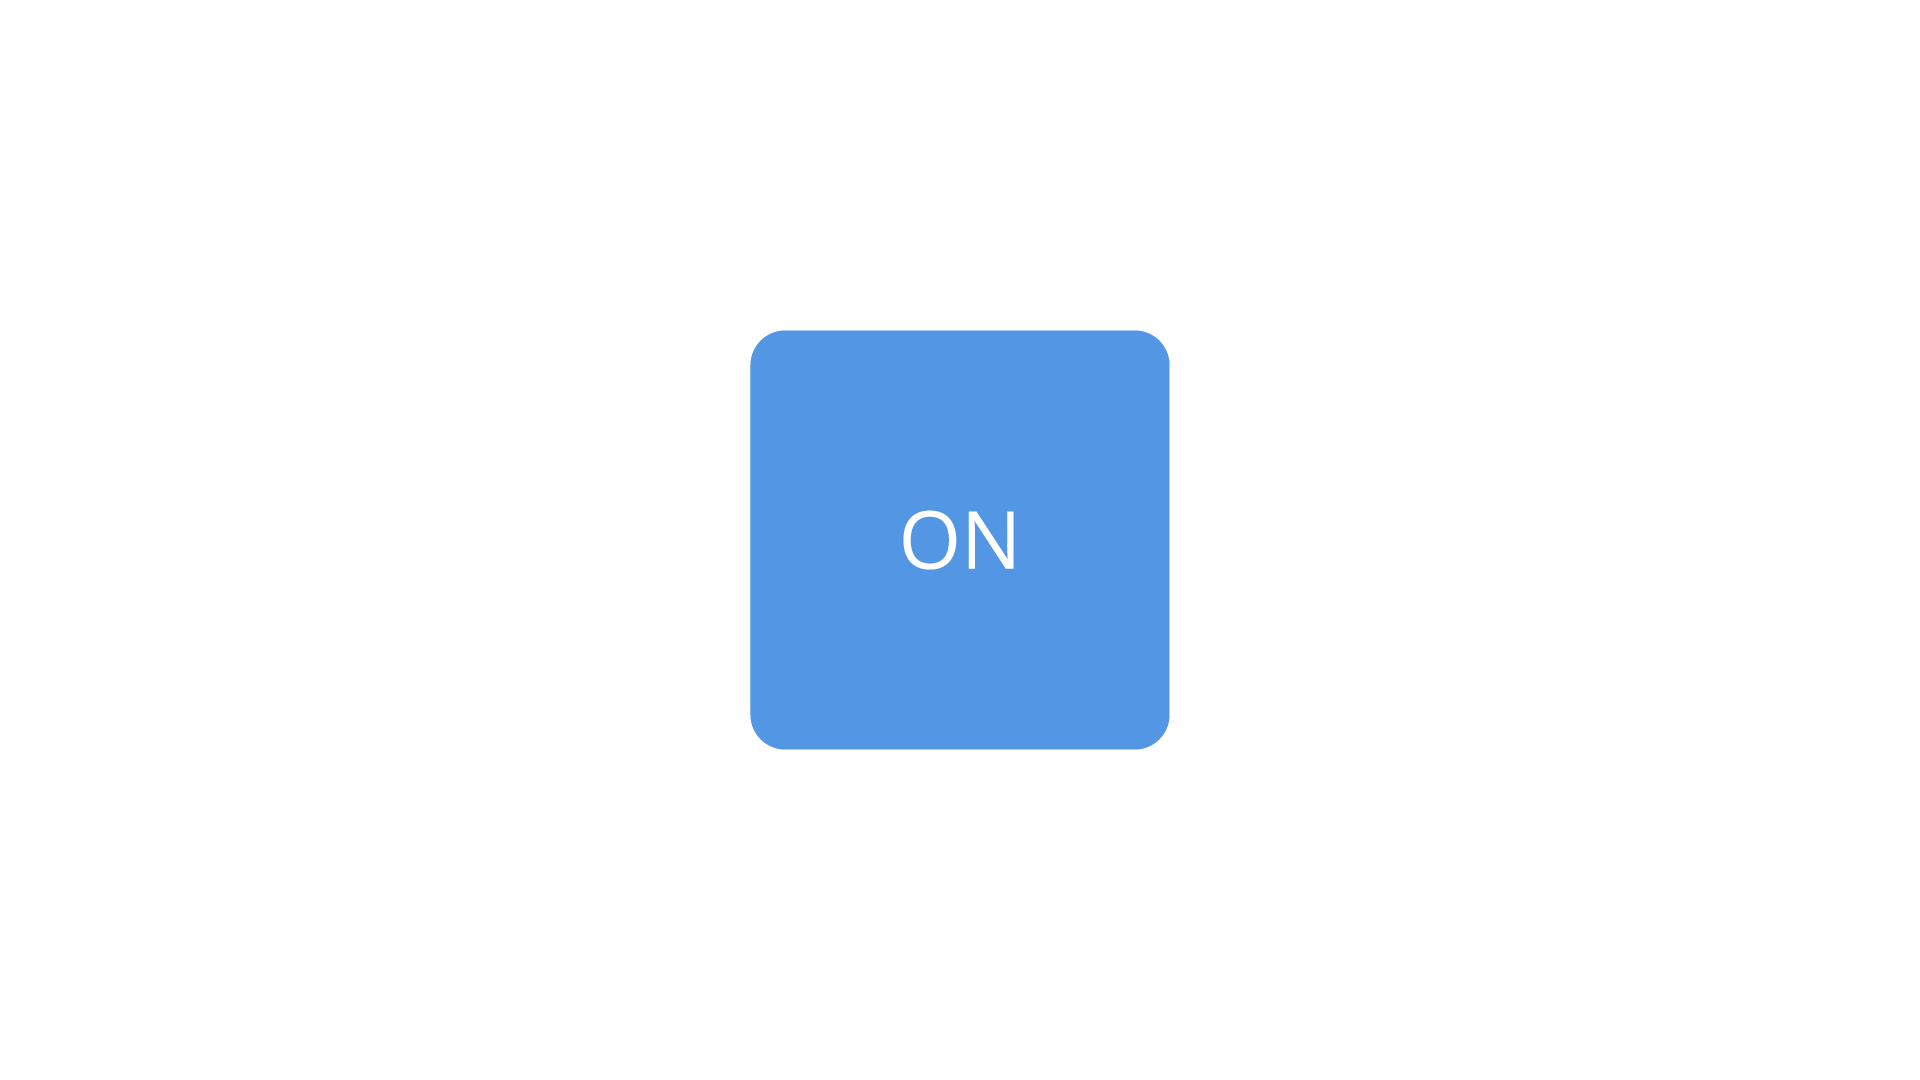 ../../_images/toggle-button1.gif